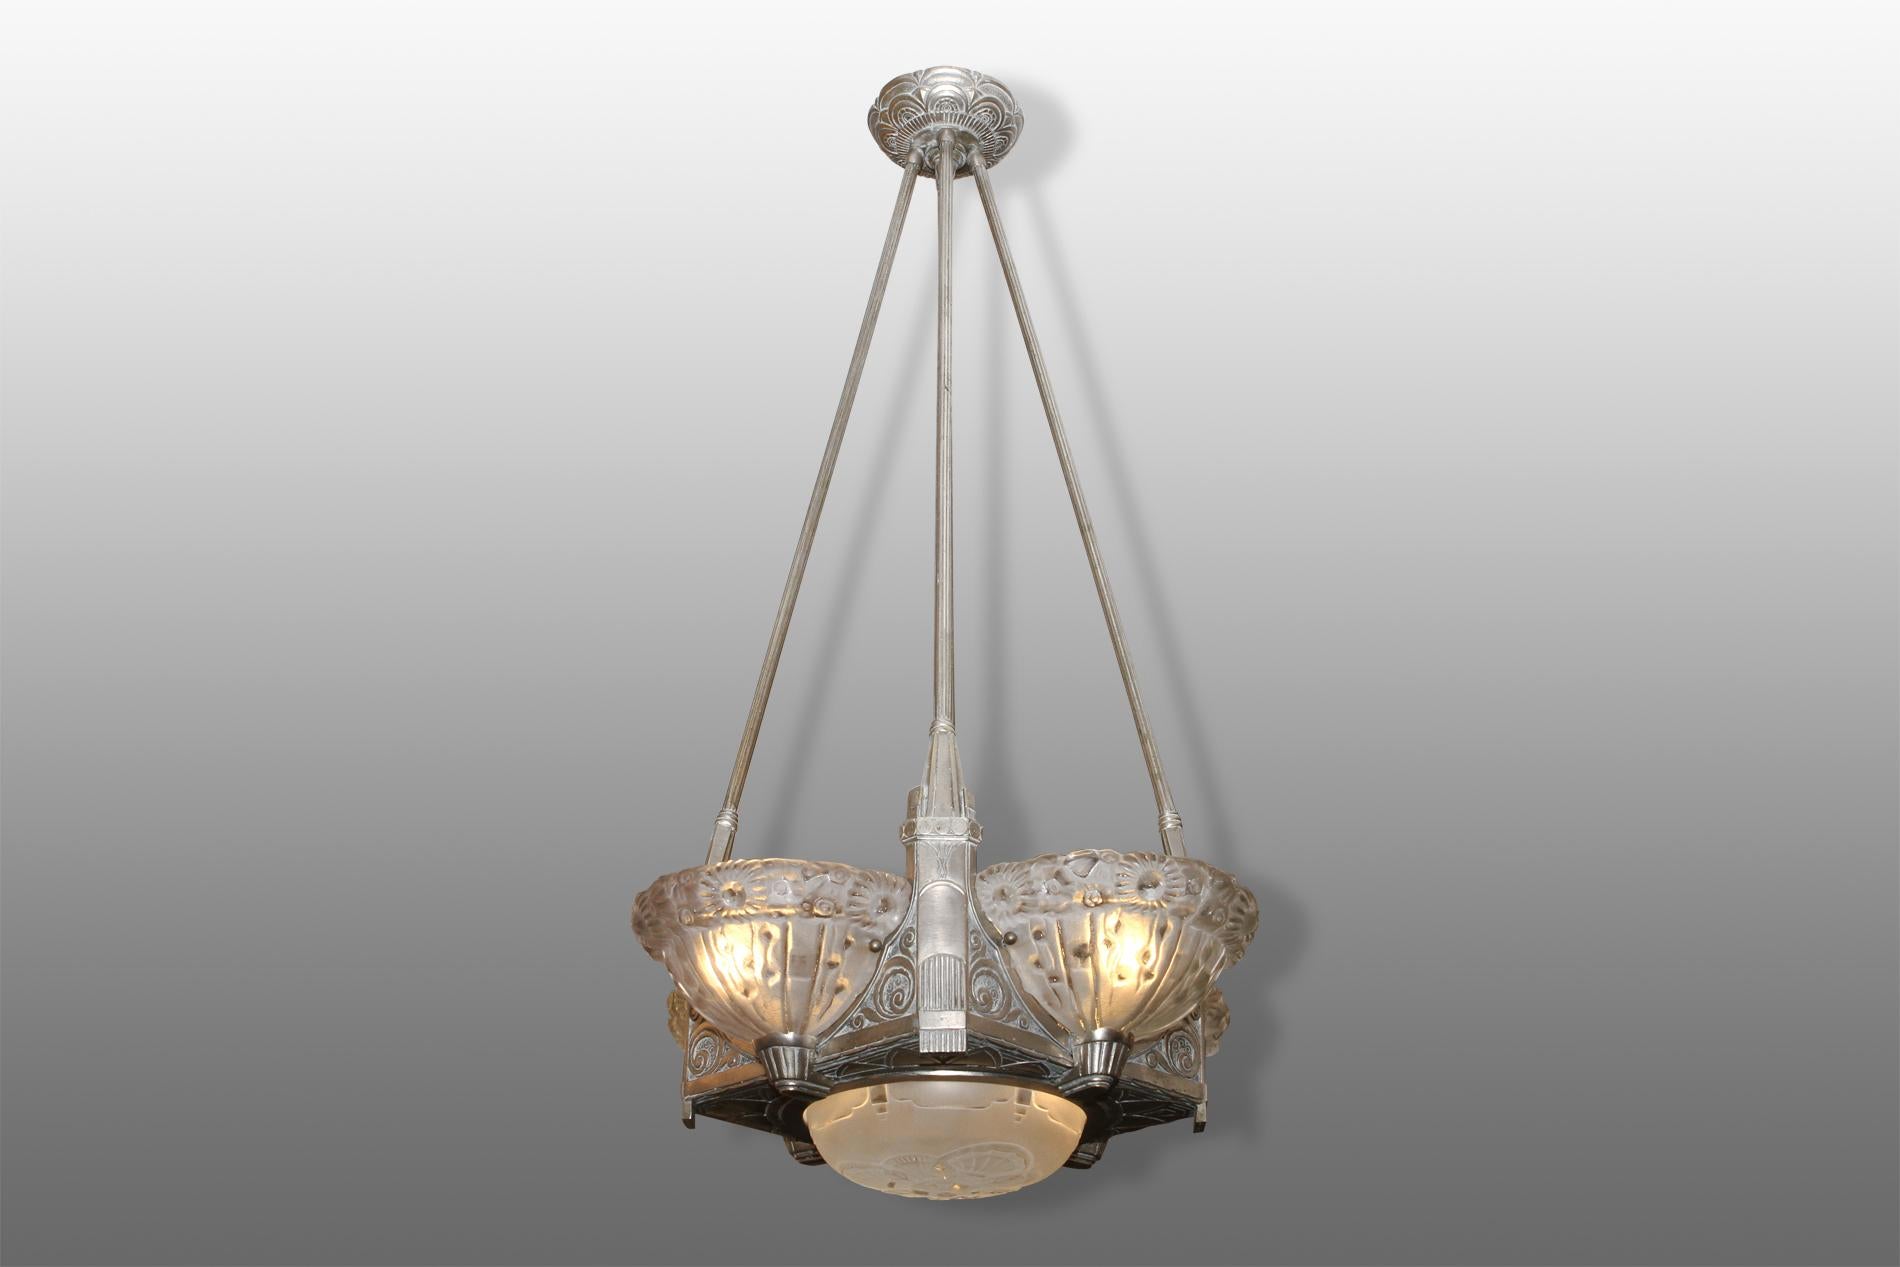 Exceptional Art Deco chandelier in glass by the french designer Genet et Michon. This original piece from 1930 has 5 glasses separated by a bronze structure. Its flower shape and art glass work represents the true style of the Art deco movement. The